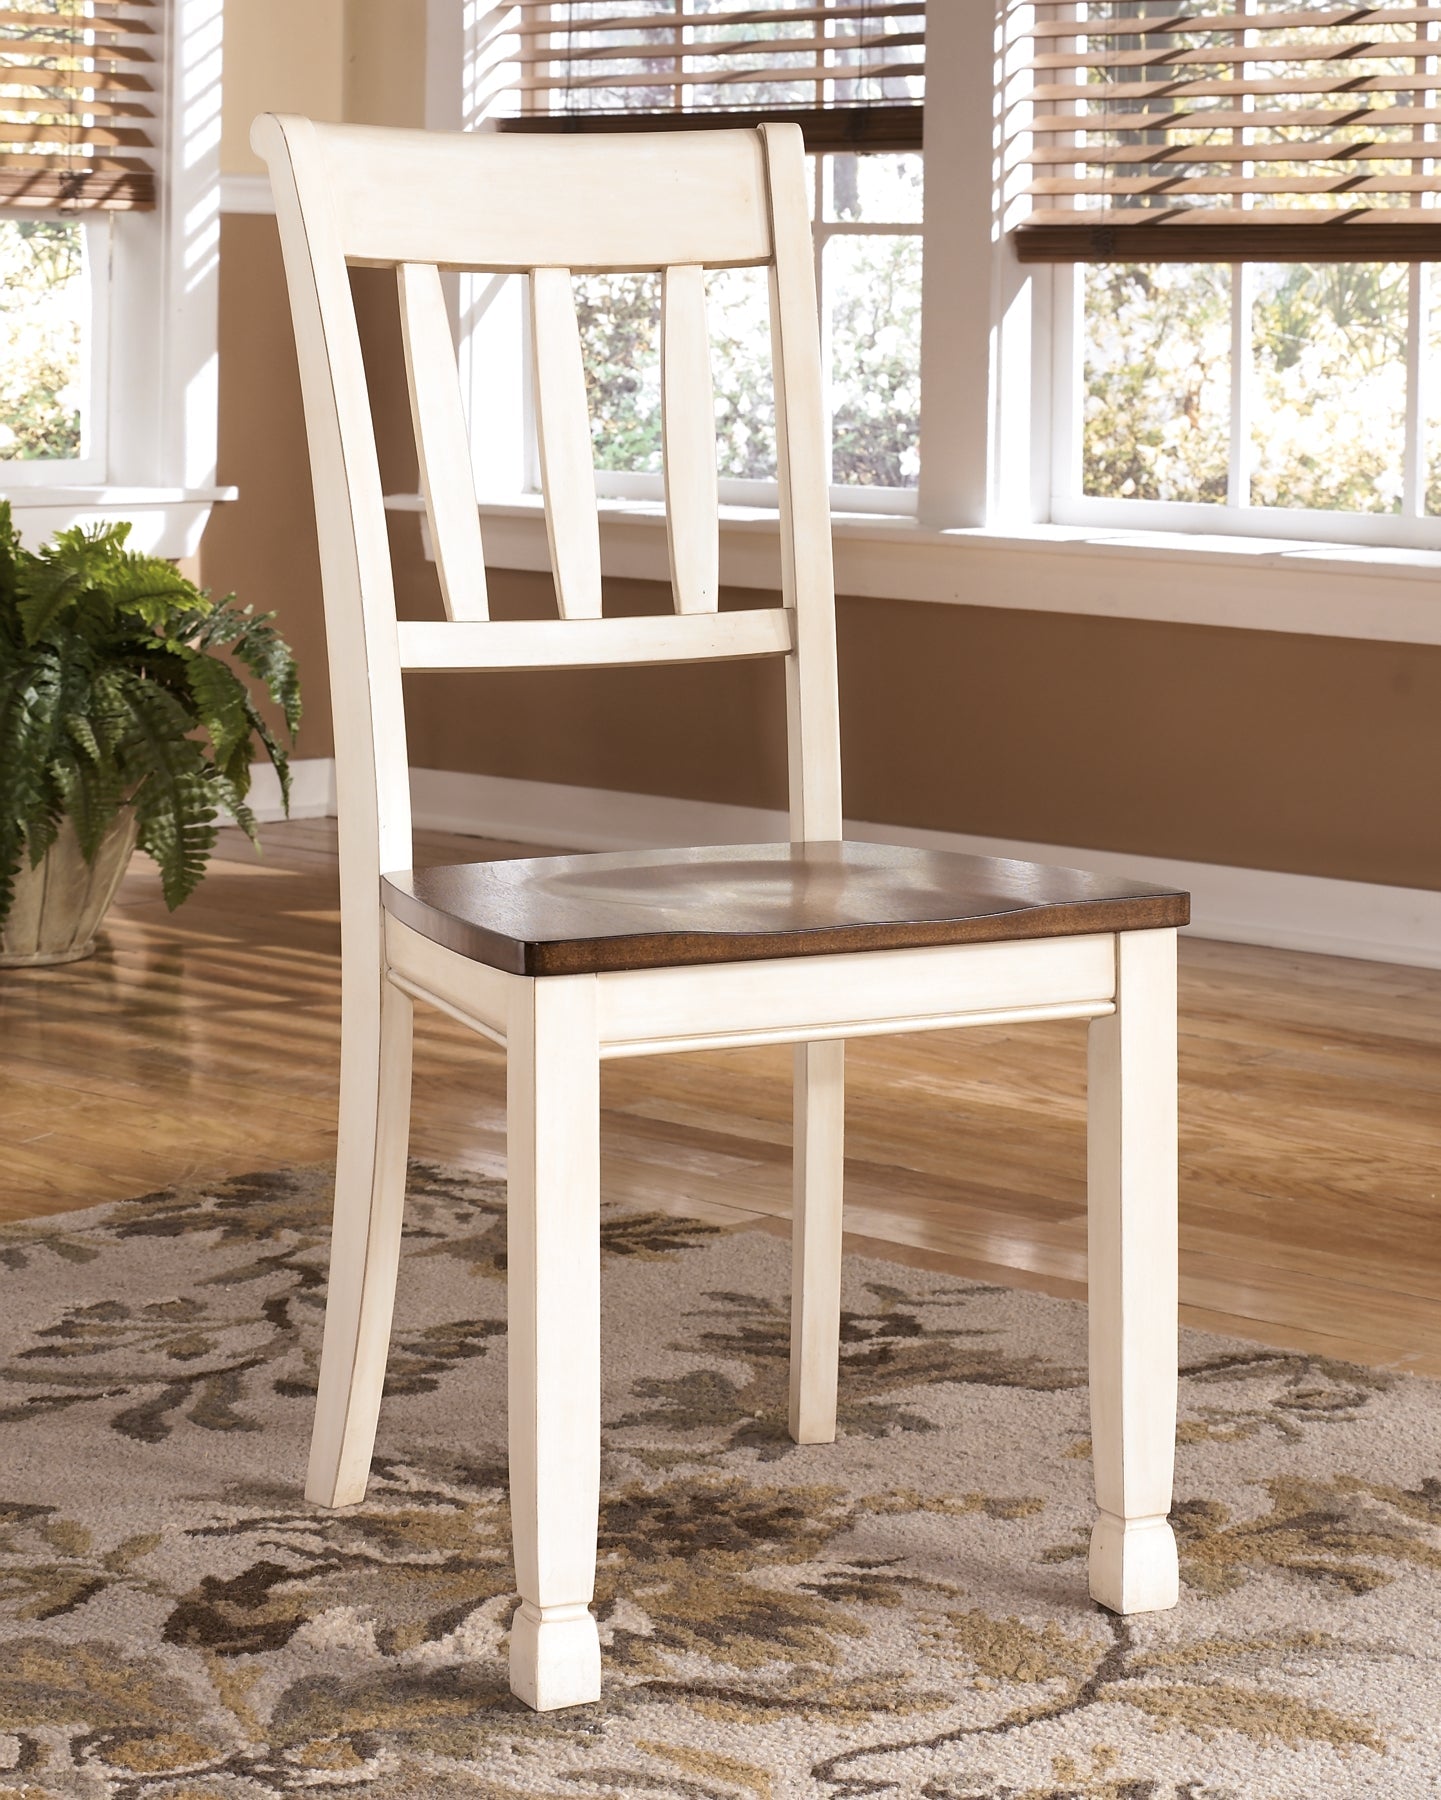 Whitesburg Dining Table and 4 Chairs with Storage at Walker Mattress and Furniture Locations in Cedar Park and Belton TX.